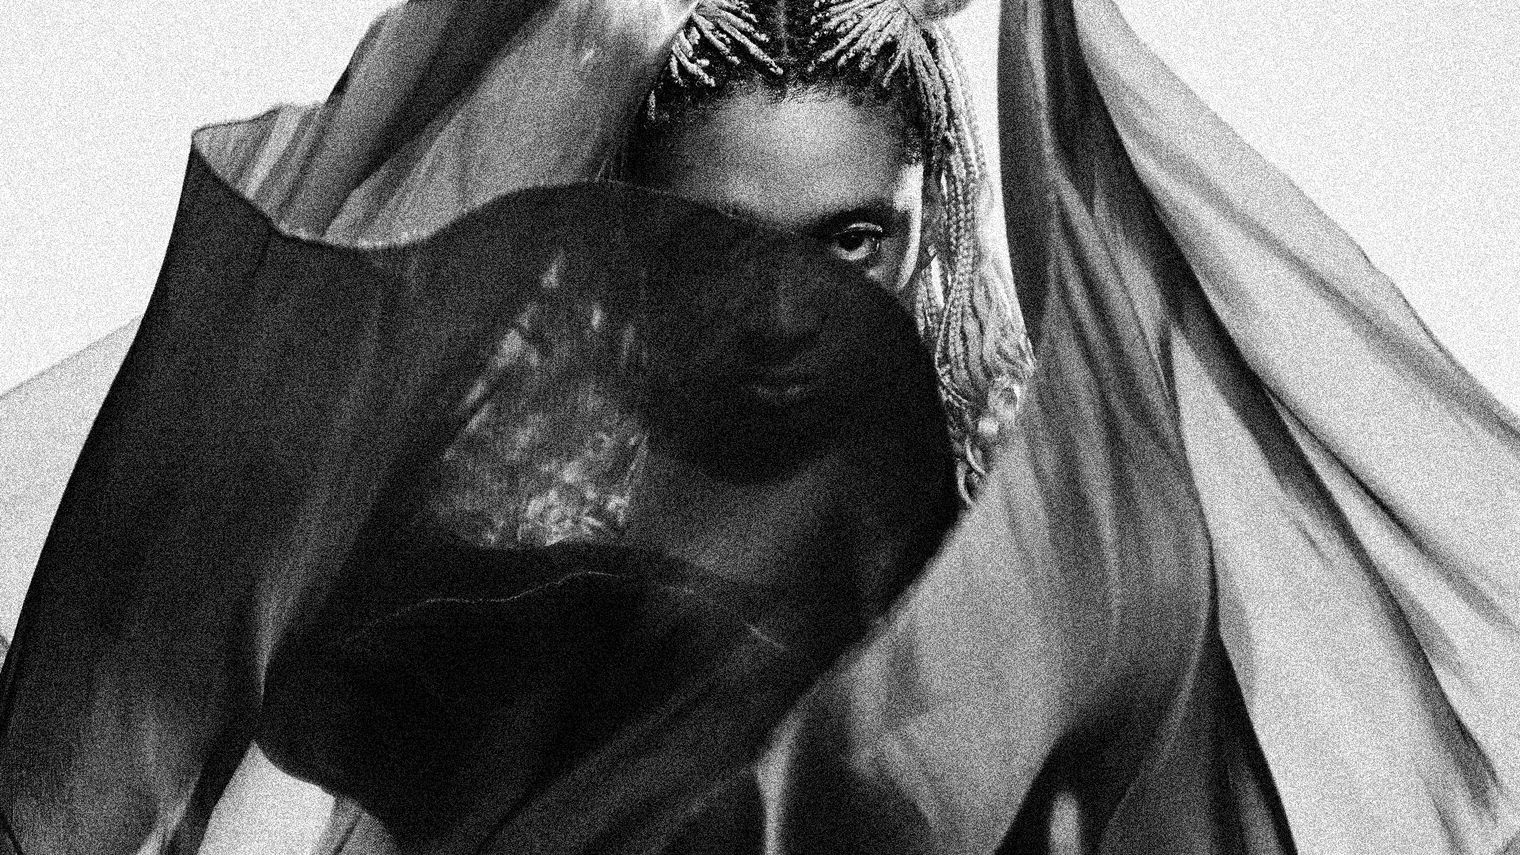 Lotic shrouded in flowing fabric.